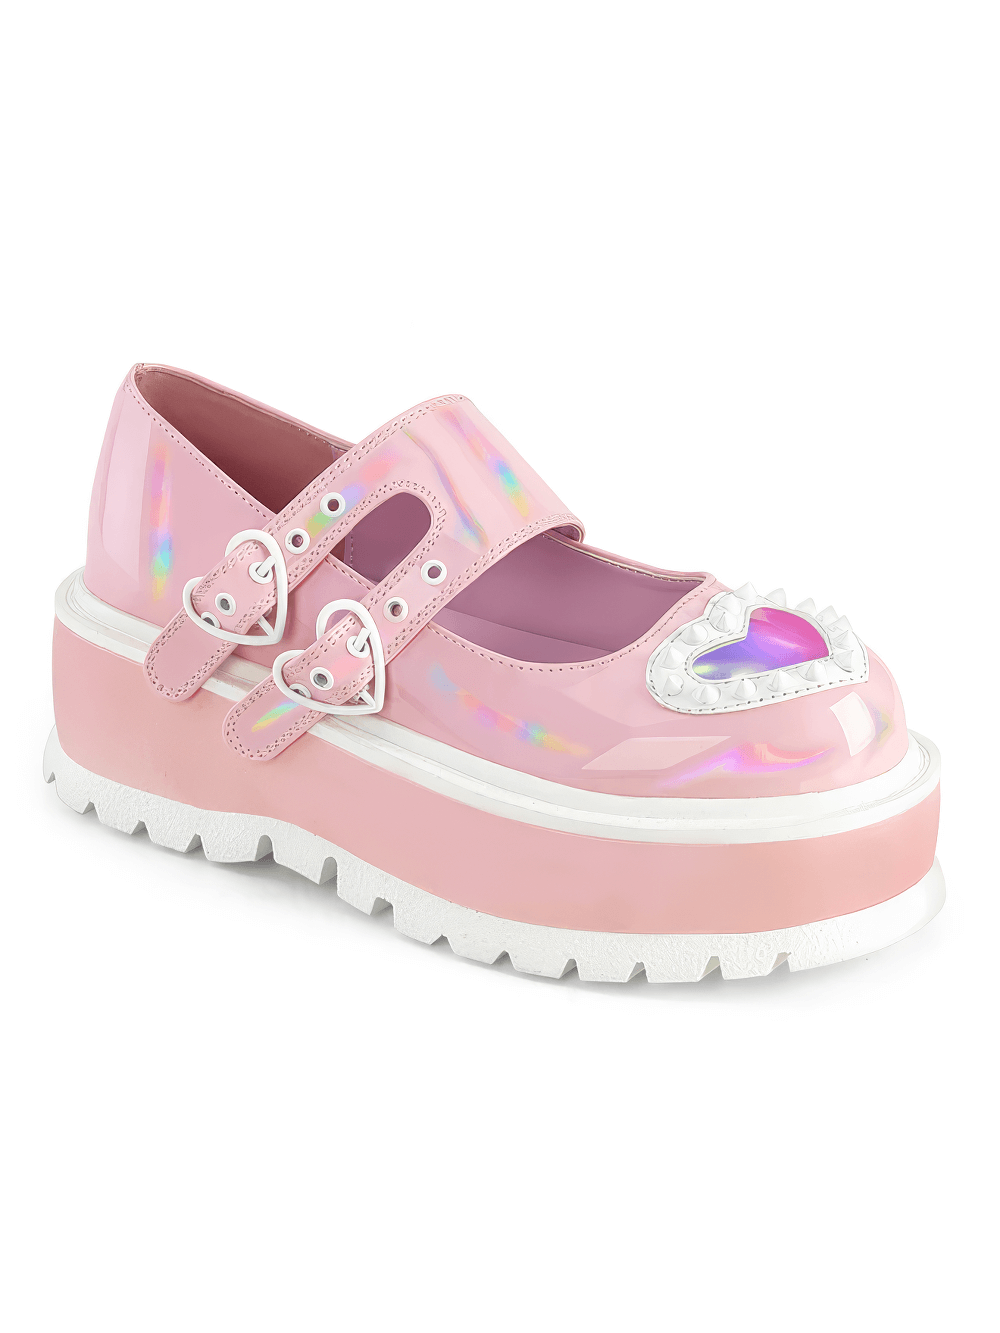 DEMONIA Pink Holo Mary Jane Shoes with Heart Buckle